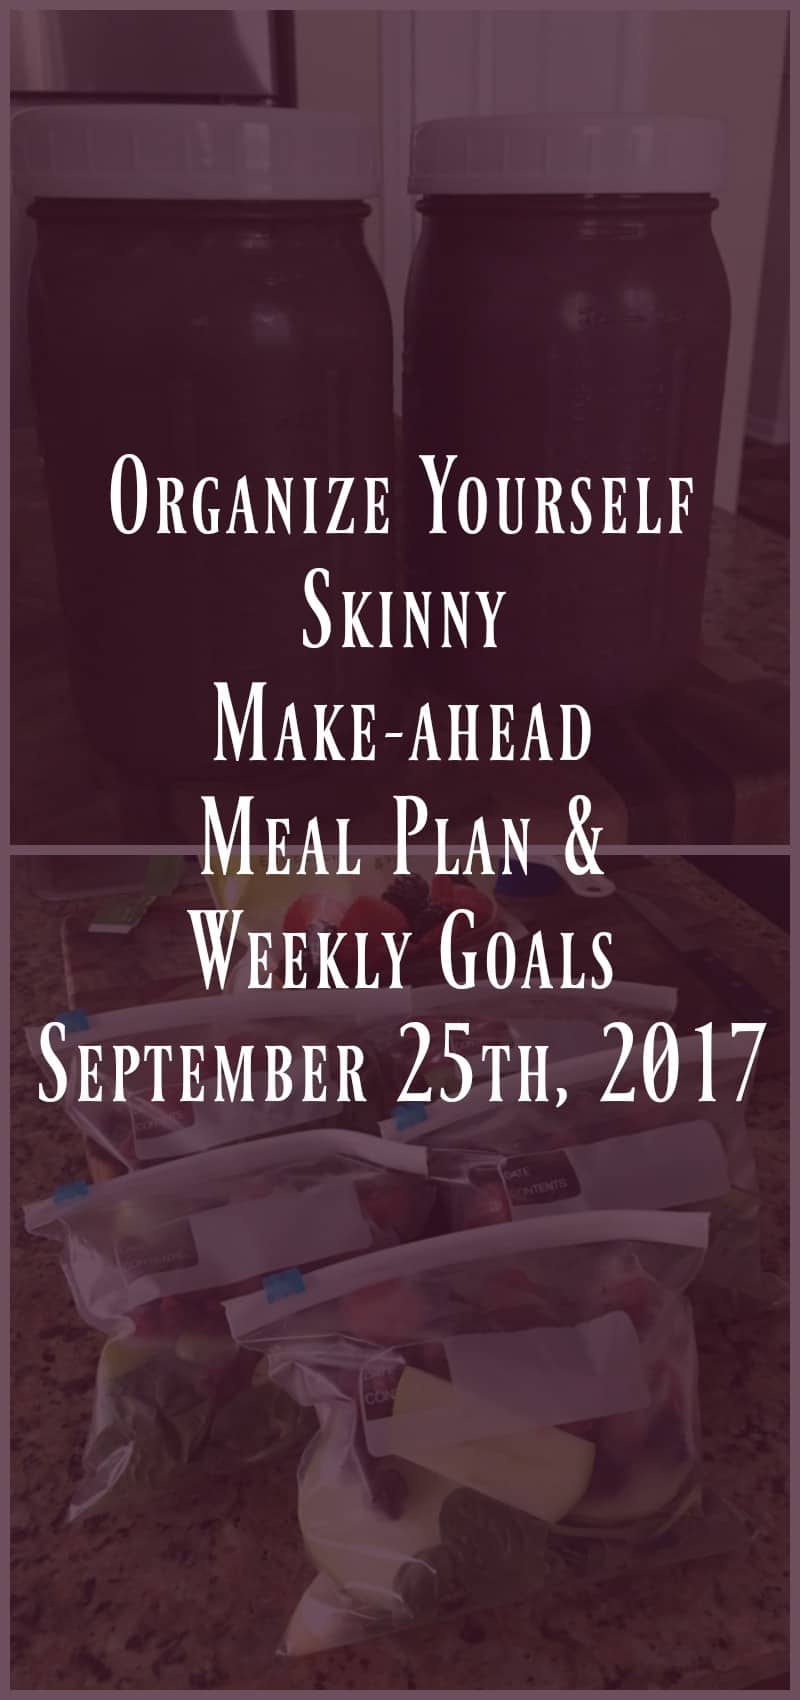 make-ahead meal plan and Weekly Goals